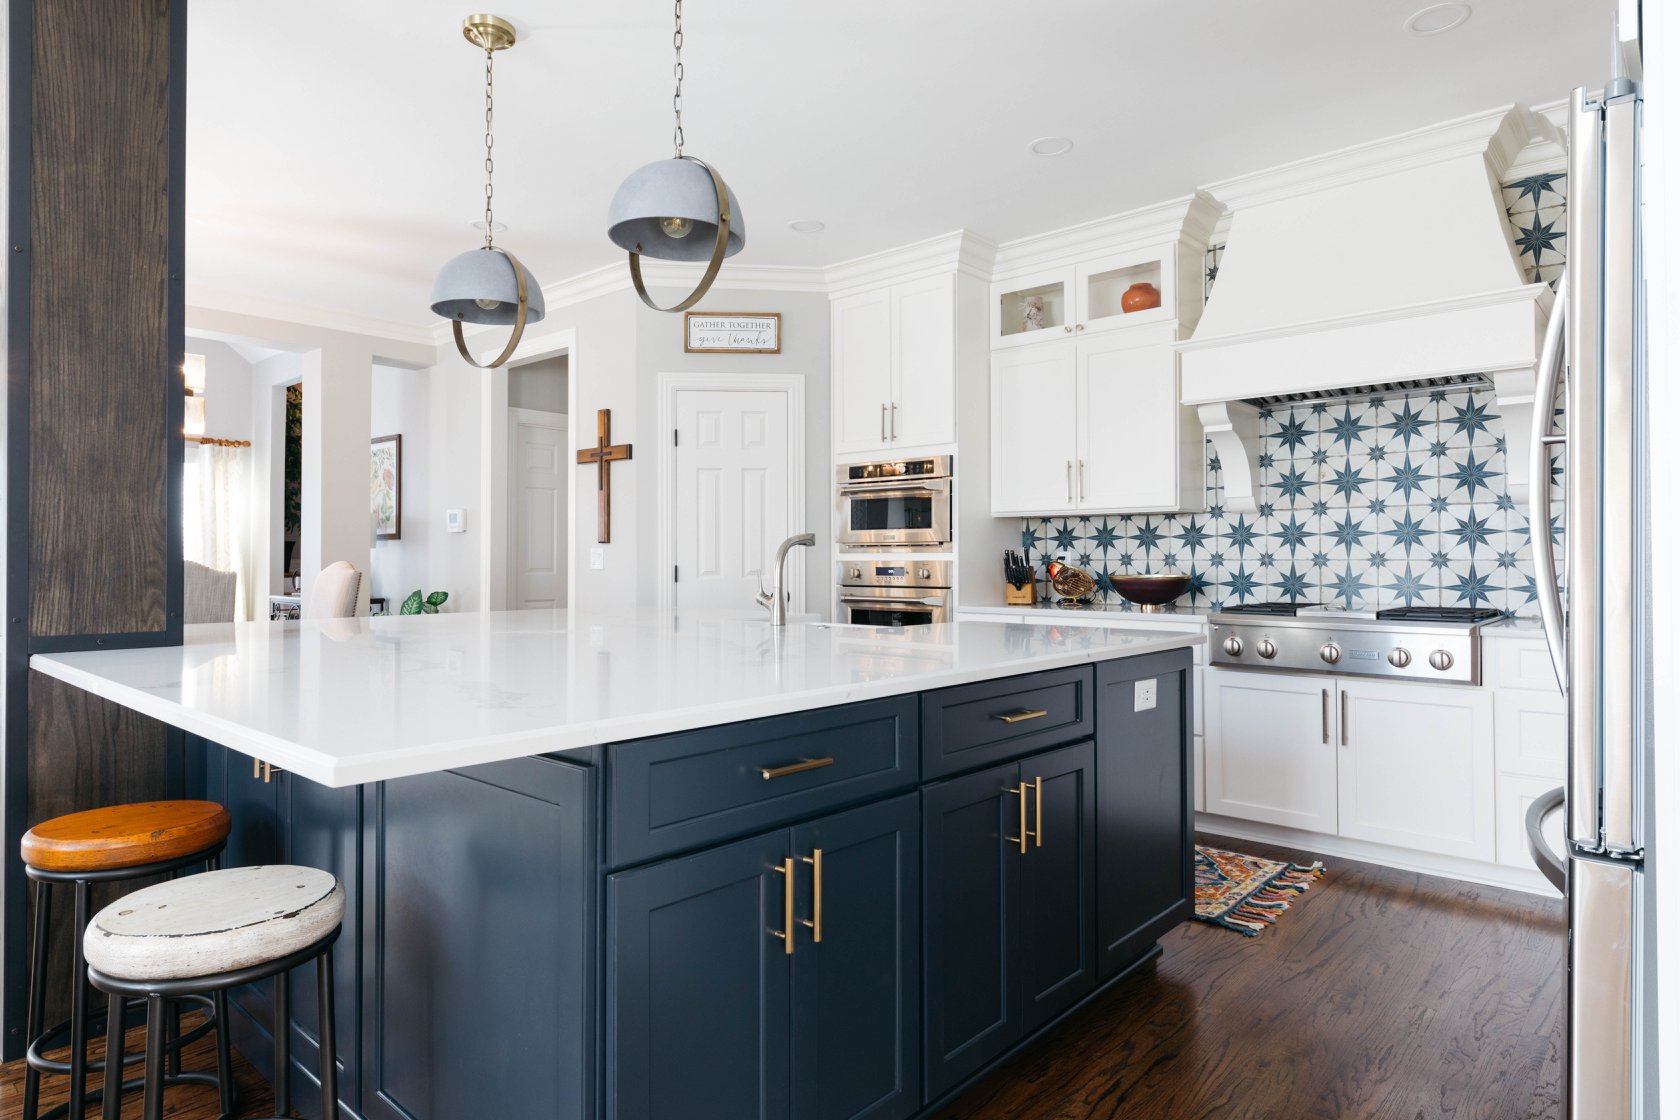 Finding the Right Kitchen Style for Your Needs